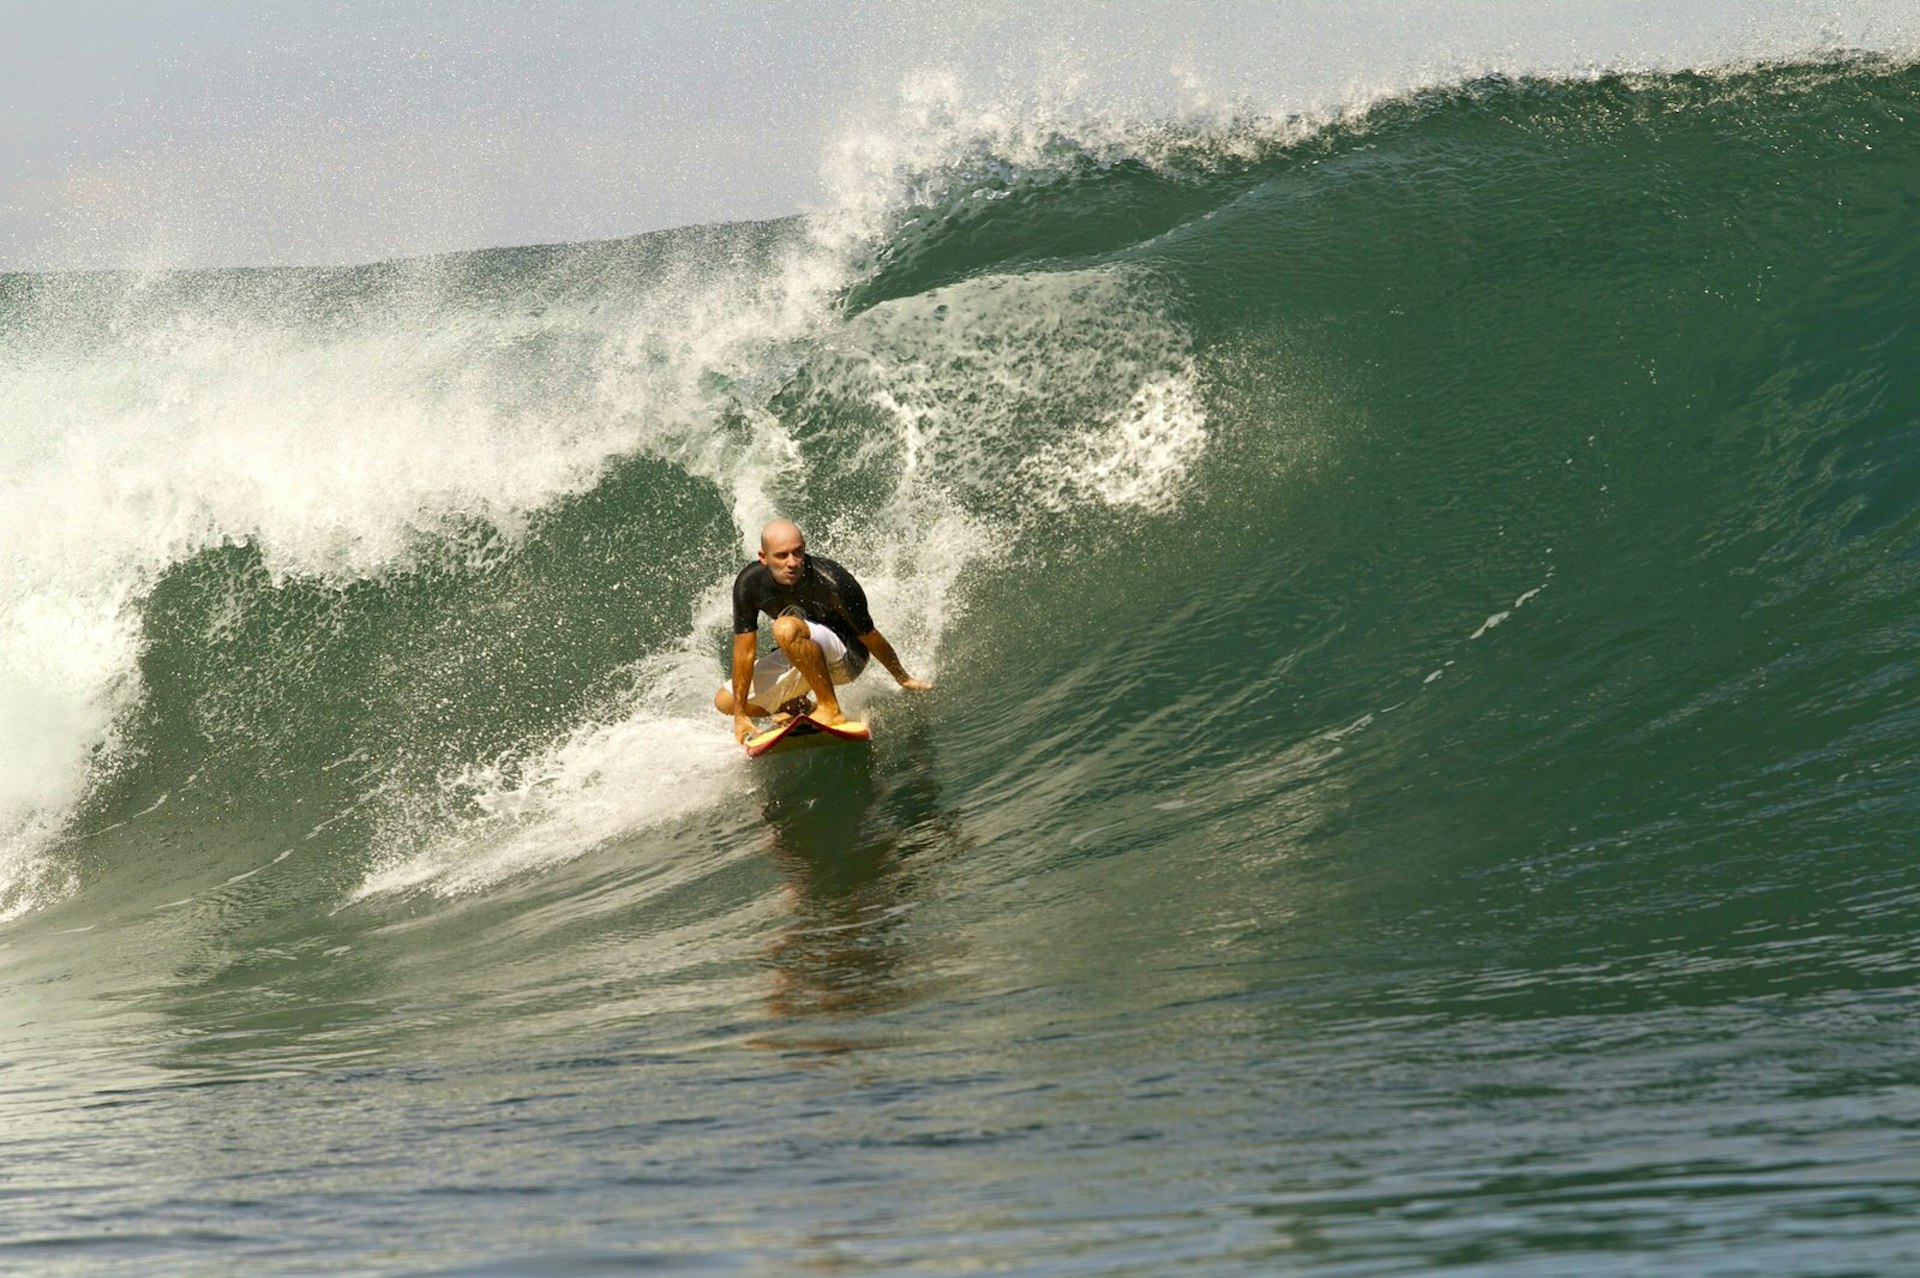 Lesser-known surfing spots - a surfer rides a large wave at Pico de Loro, Colombia